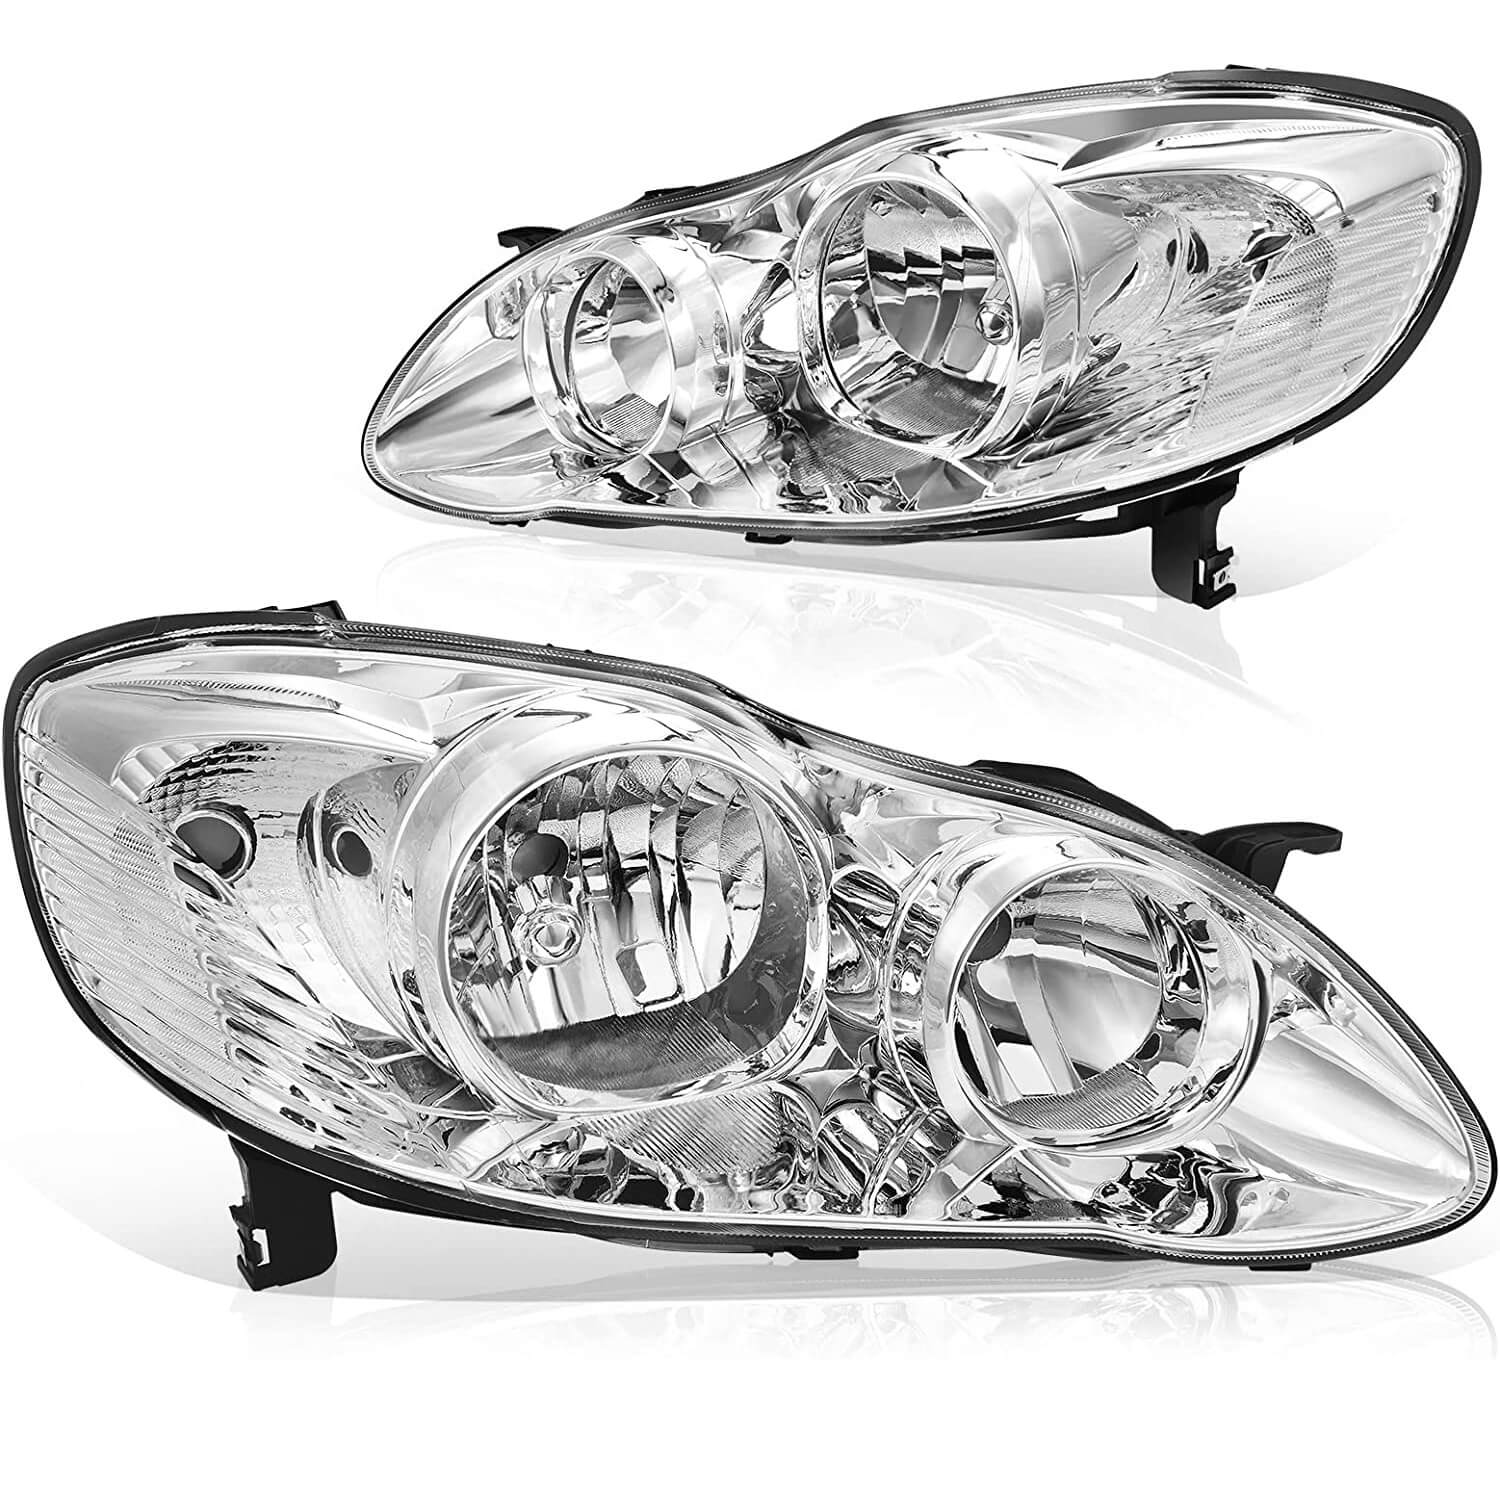 2003-2008 Toyota Corolla LED Headlights for Headlight Replacement